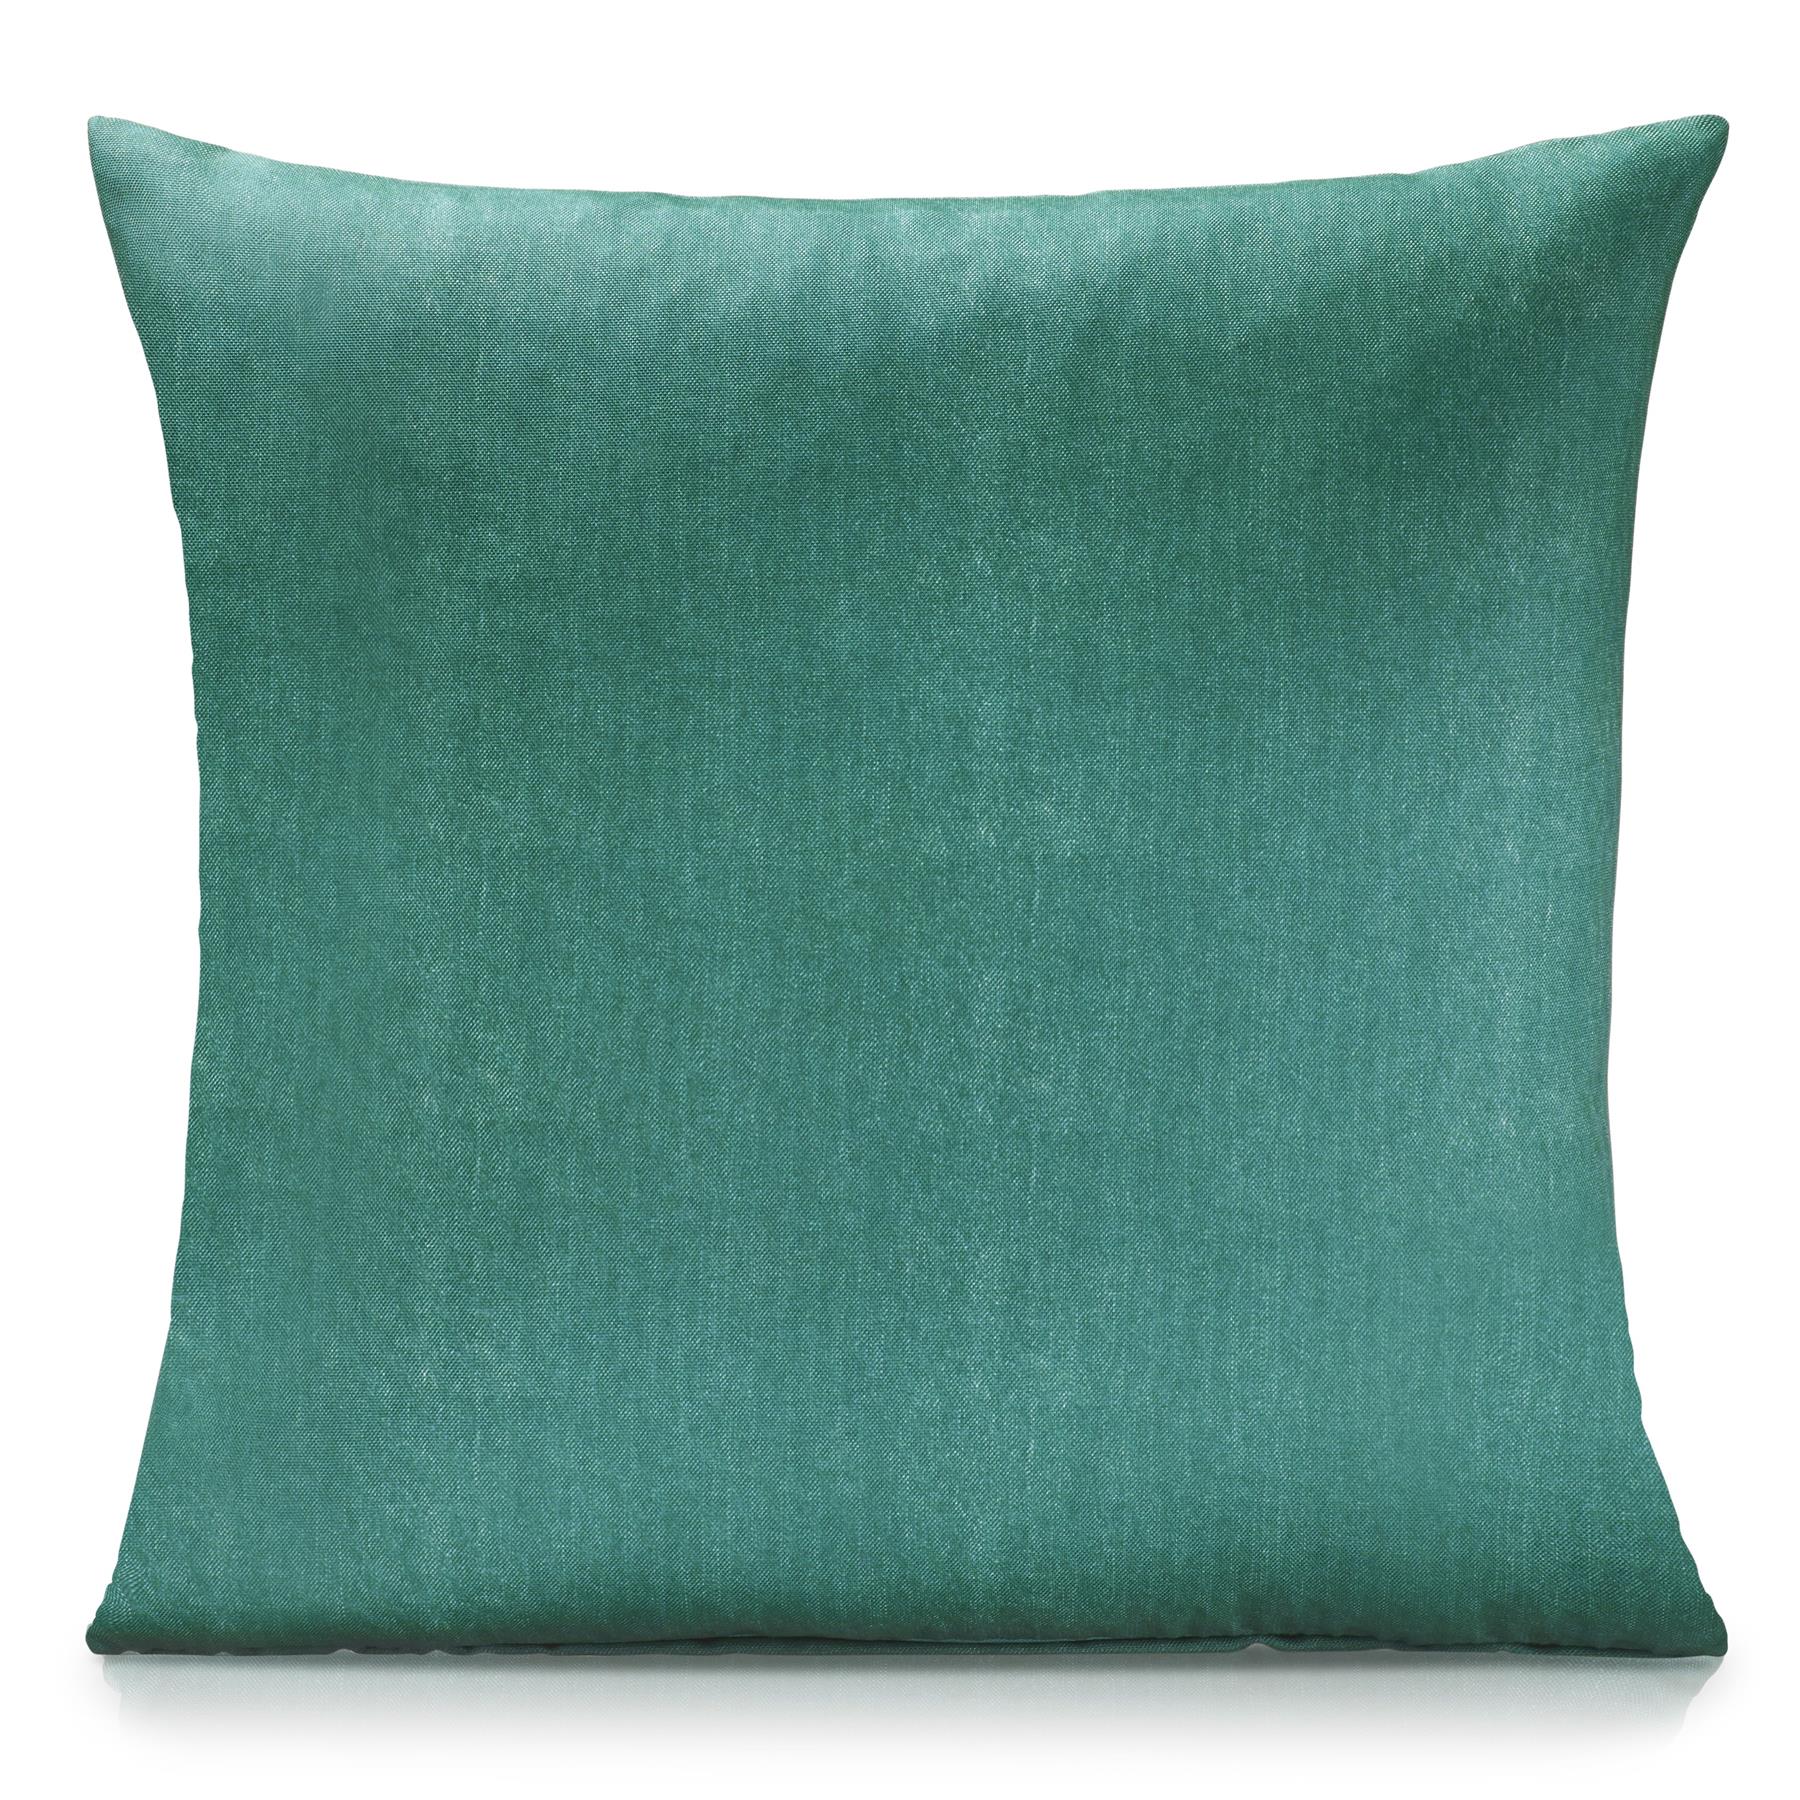 Plain Water Resistant Outdoor Filled Cushion 56cm x 56cm Green